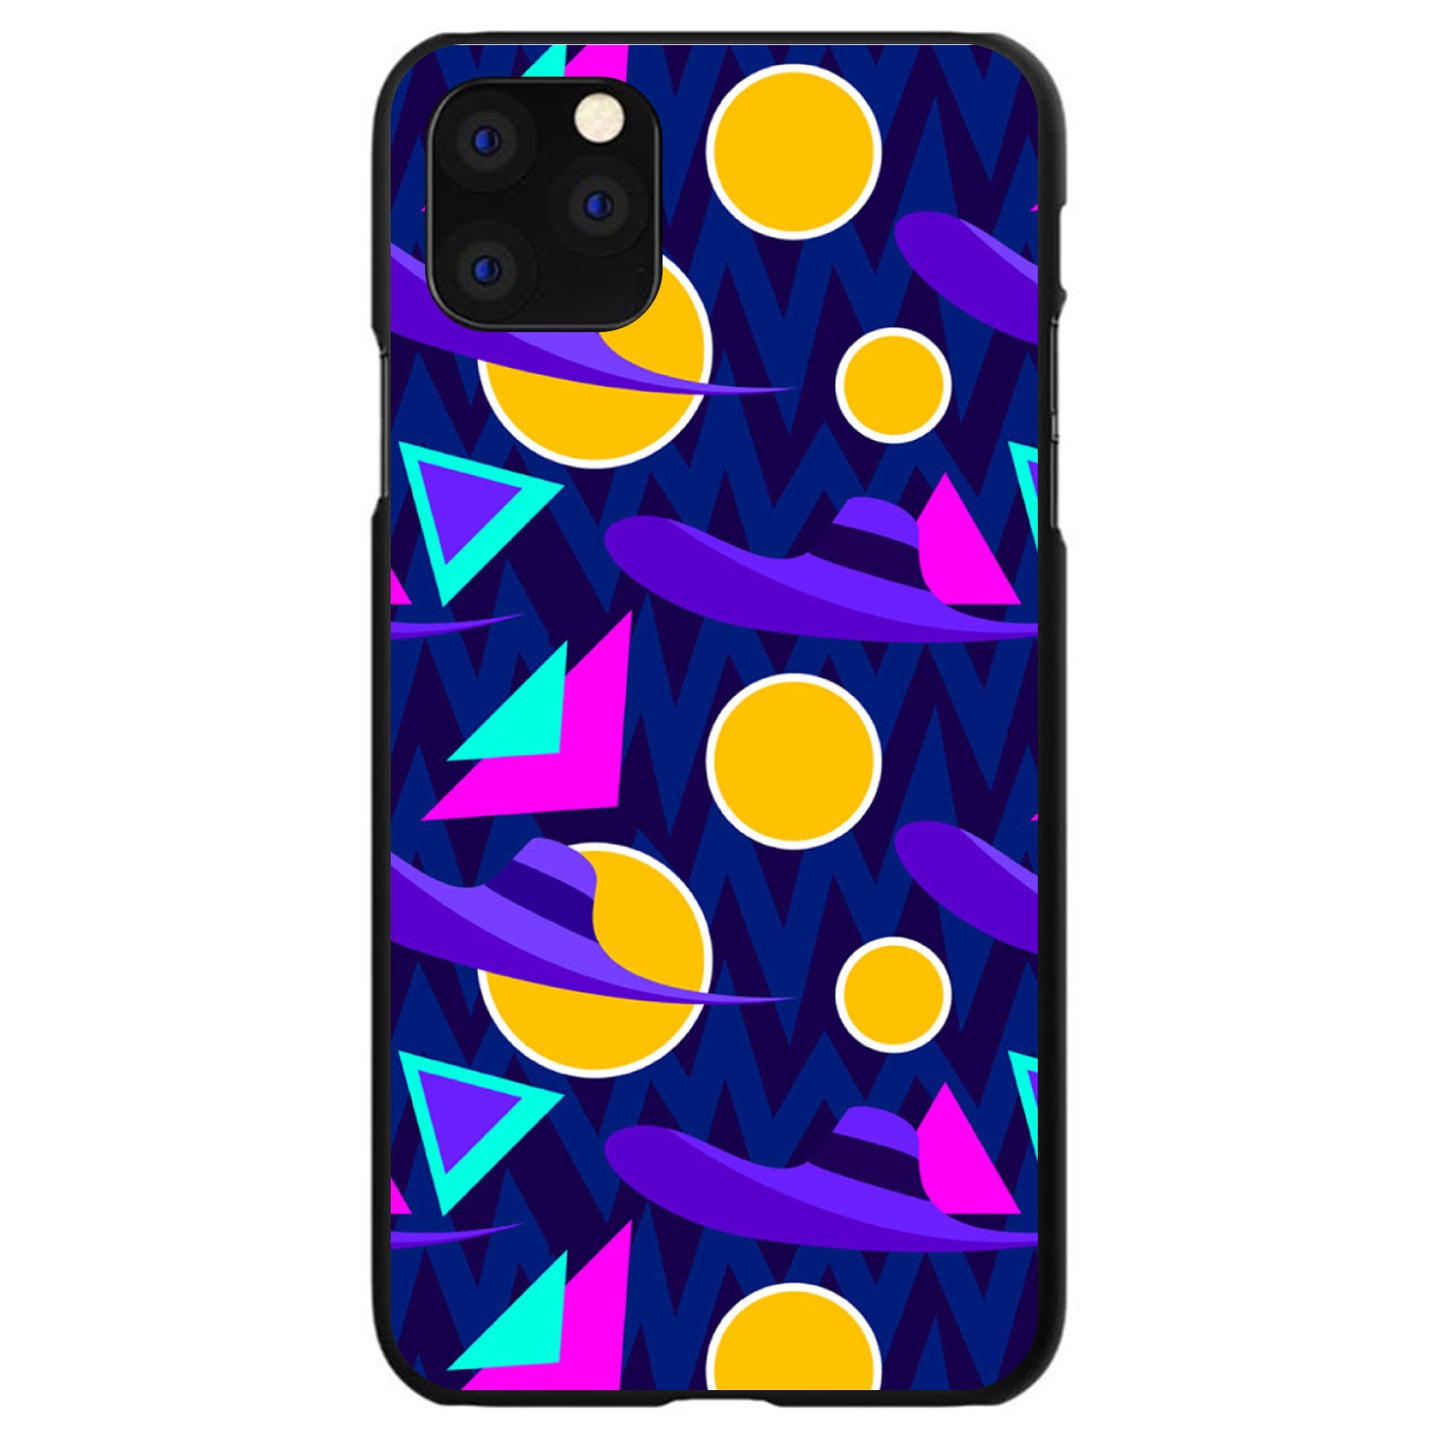 DistinctInk® Hard Plastic Snap-On Case for Apple iPhone or Samsung Galaxy - Pink Purple Yellow 90s Pattern